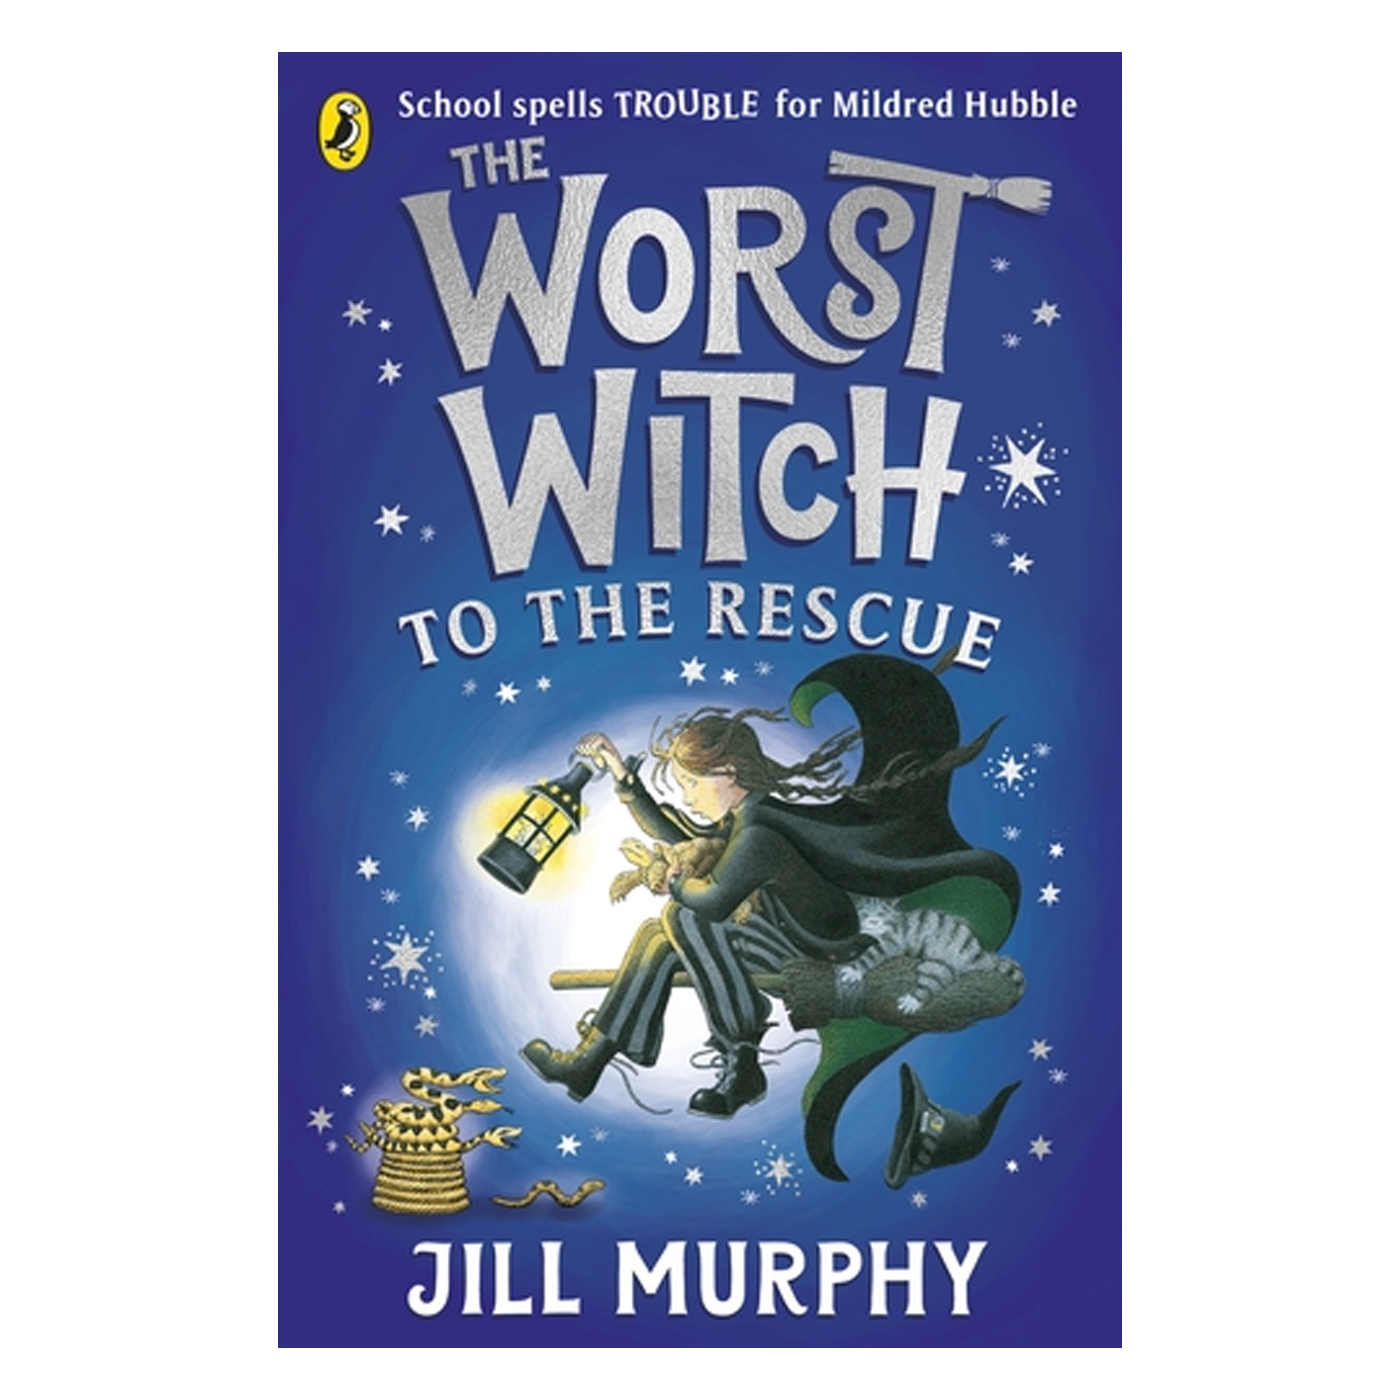  The Worst Witch To The Rescue